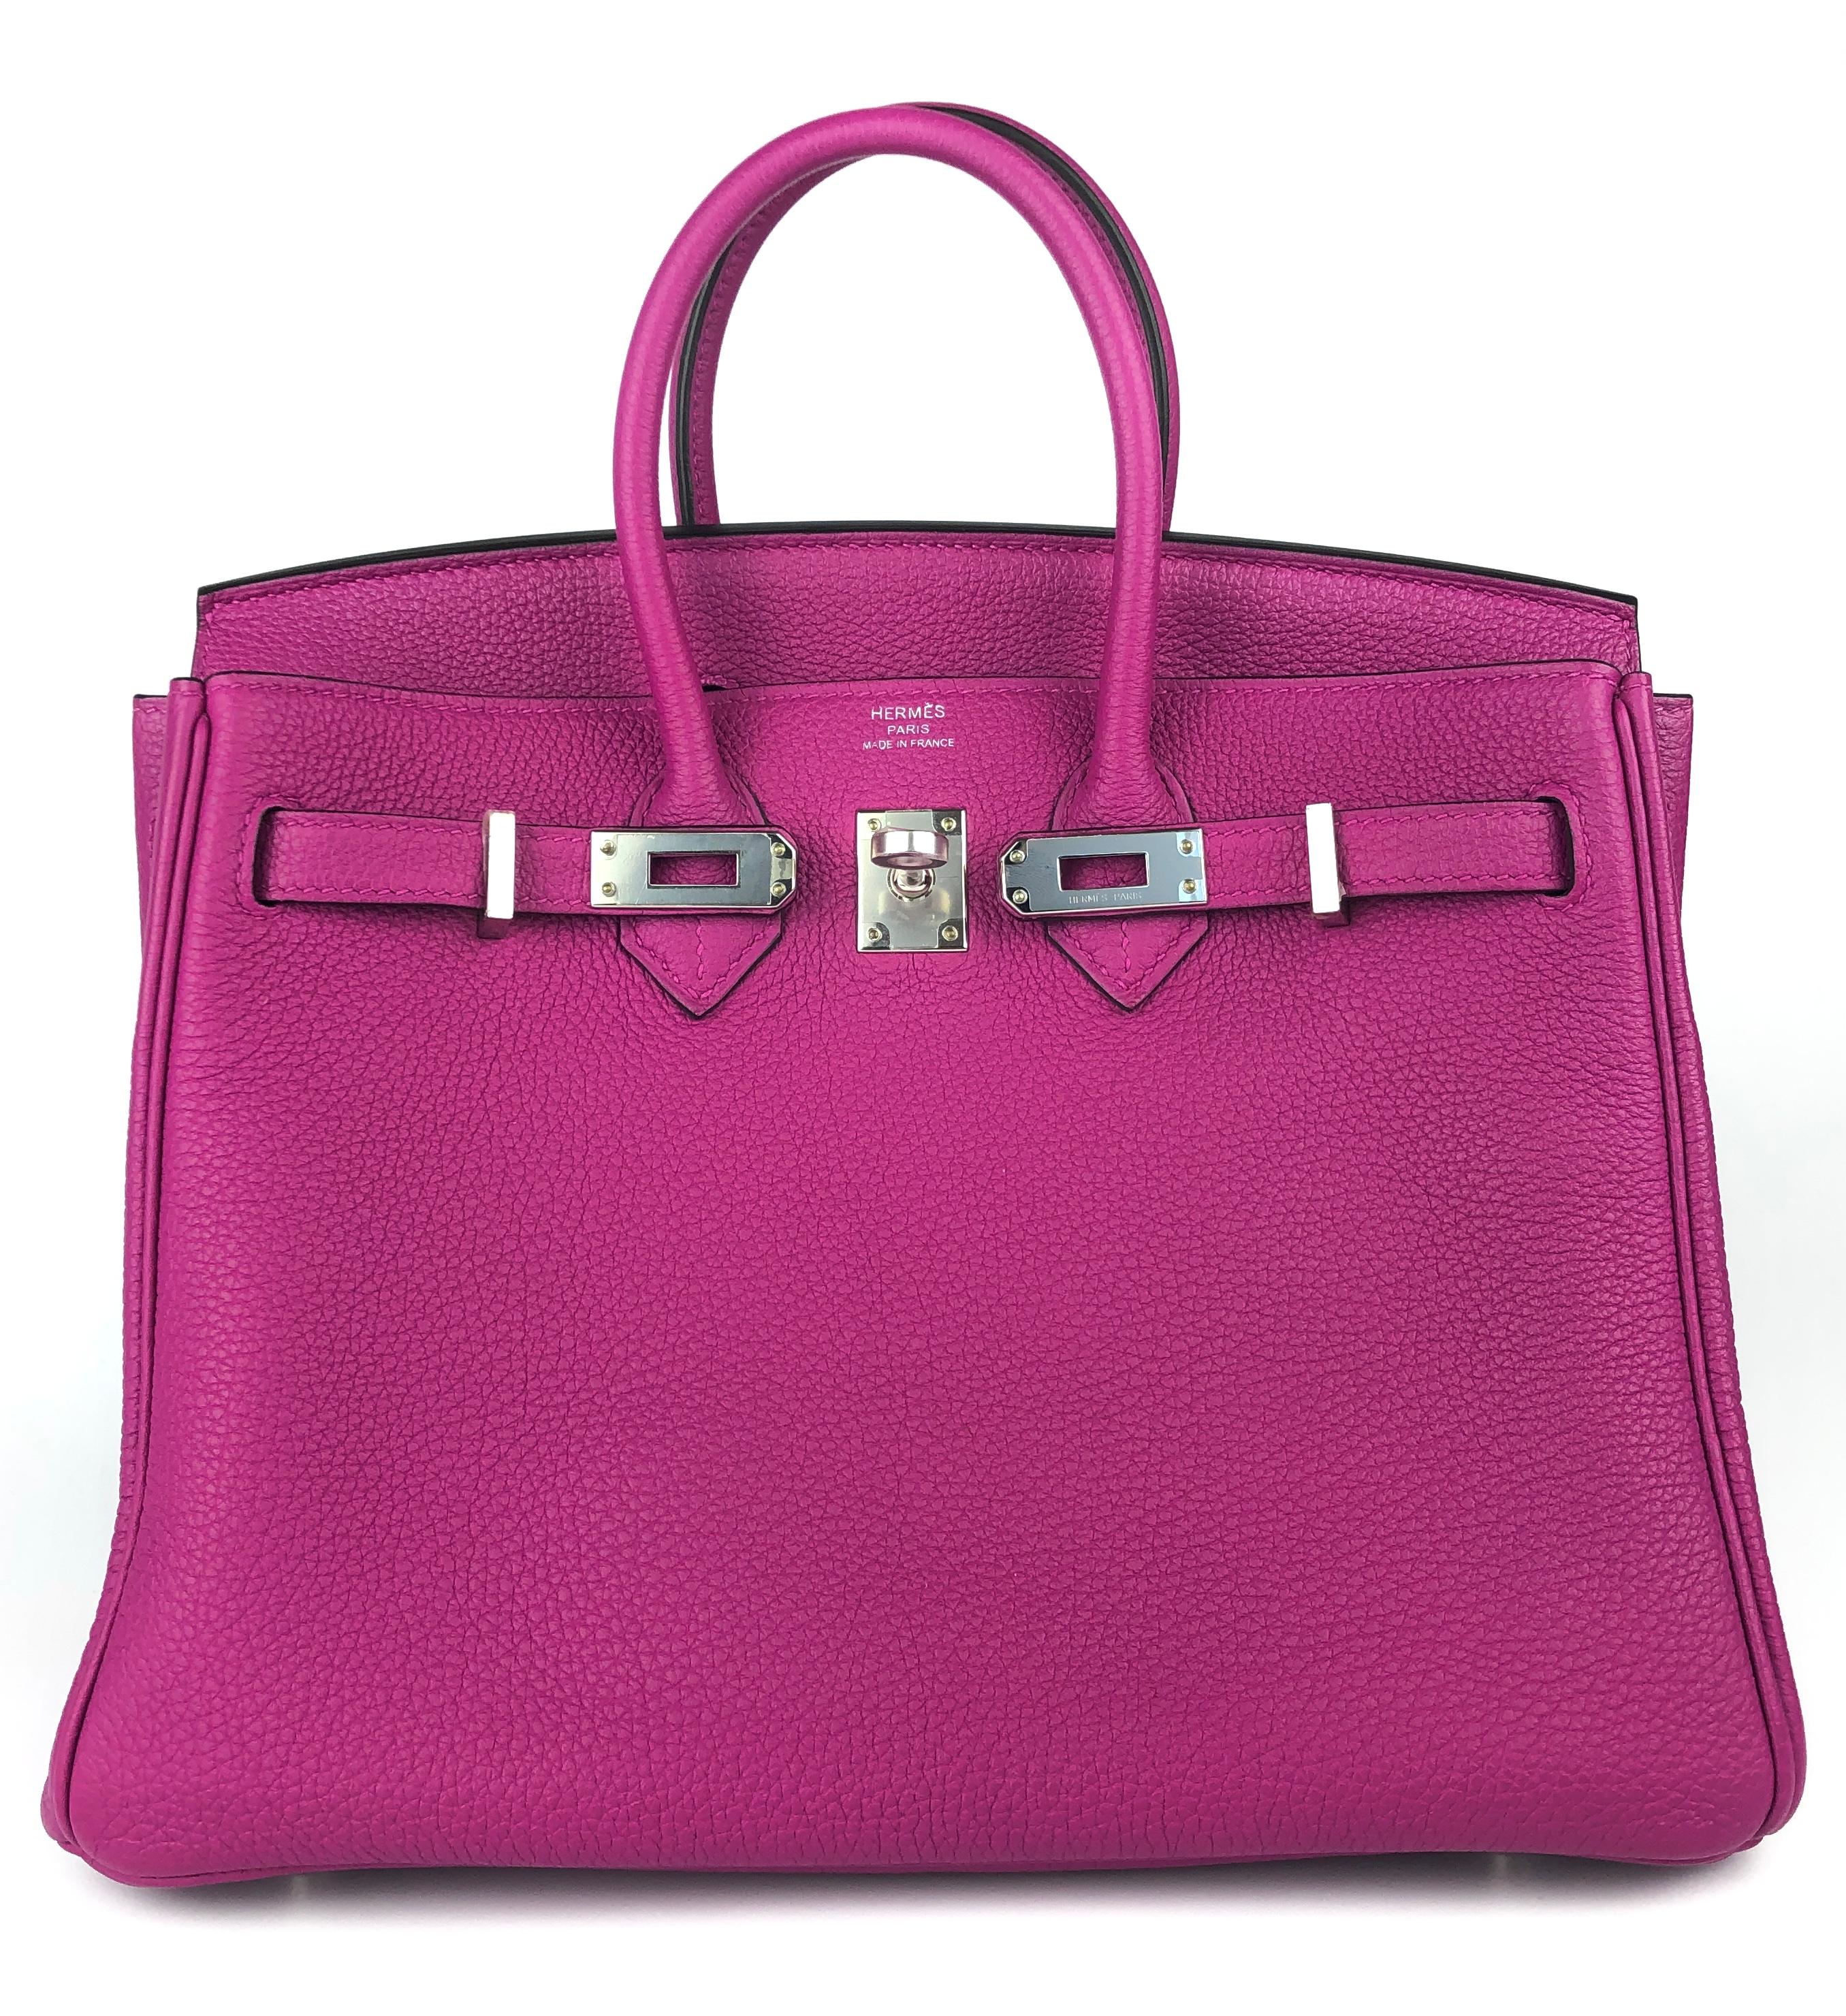 Absolutely Stunning and One The Most Coveted and Difficult to get Hermes Combos! Rare As New Hermes Birkin 25 Rose Pourpre Togo Leather Palladium Hardware. As New with Plastic on all Hardware. 2020 Y Stamp.

Shop With Confidence from Lux Addicts.